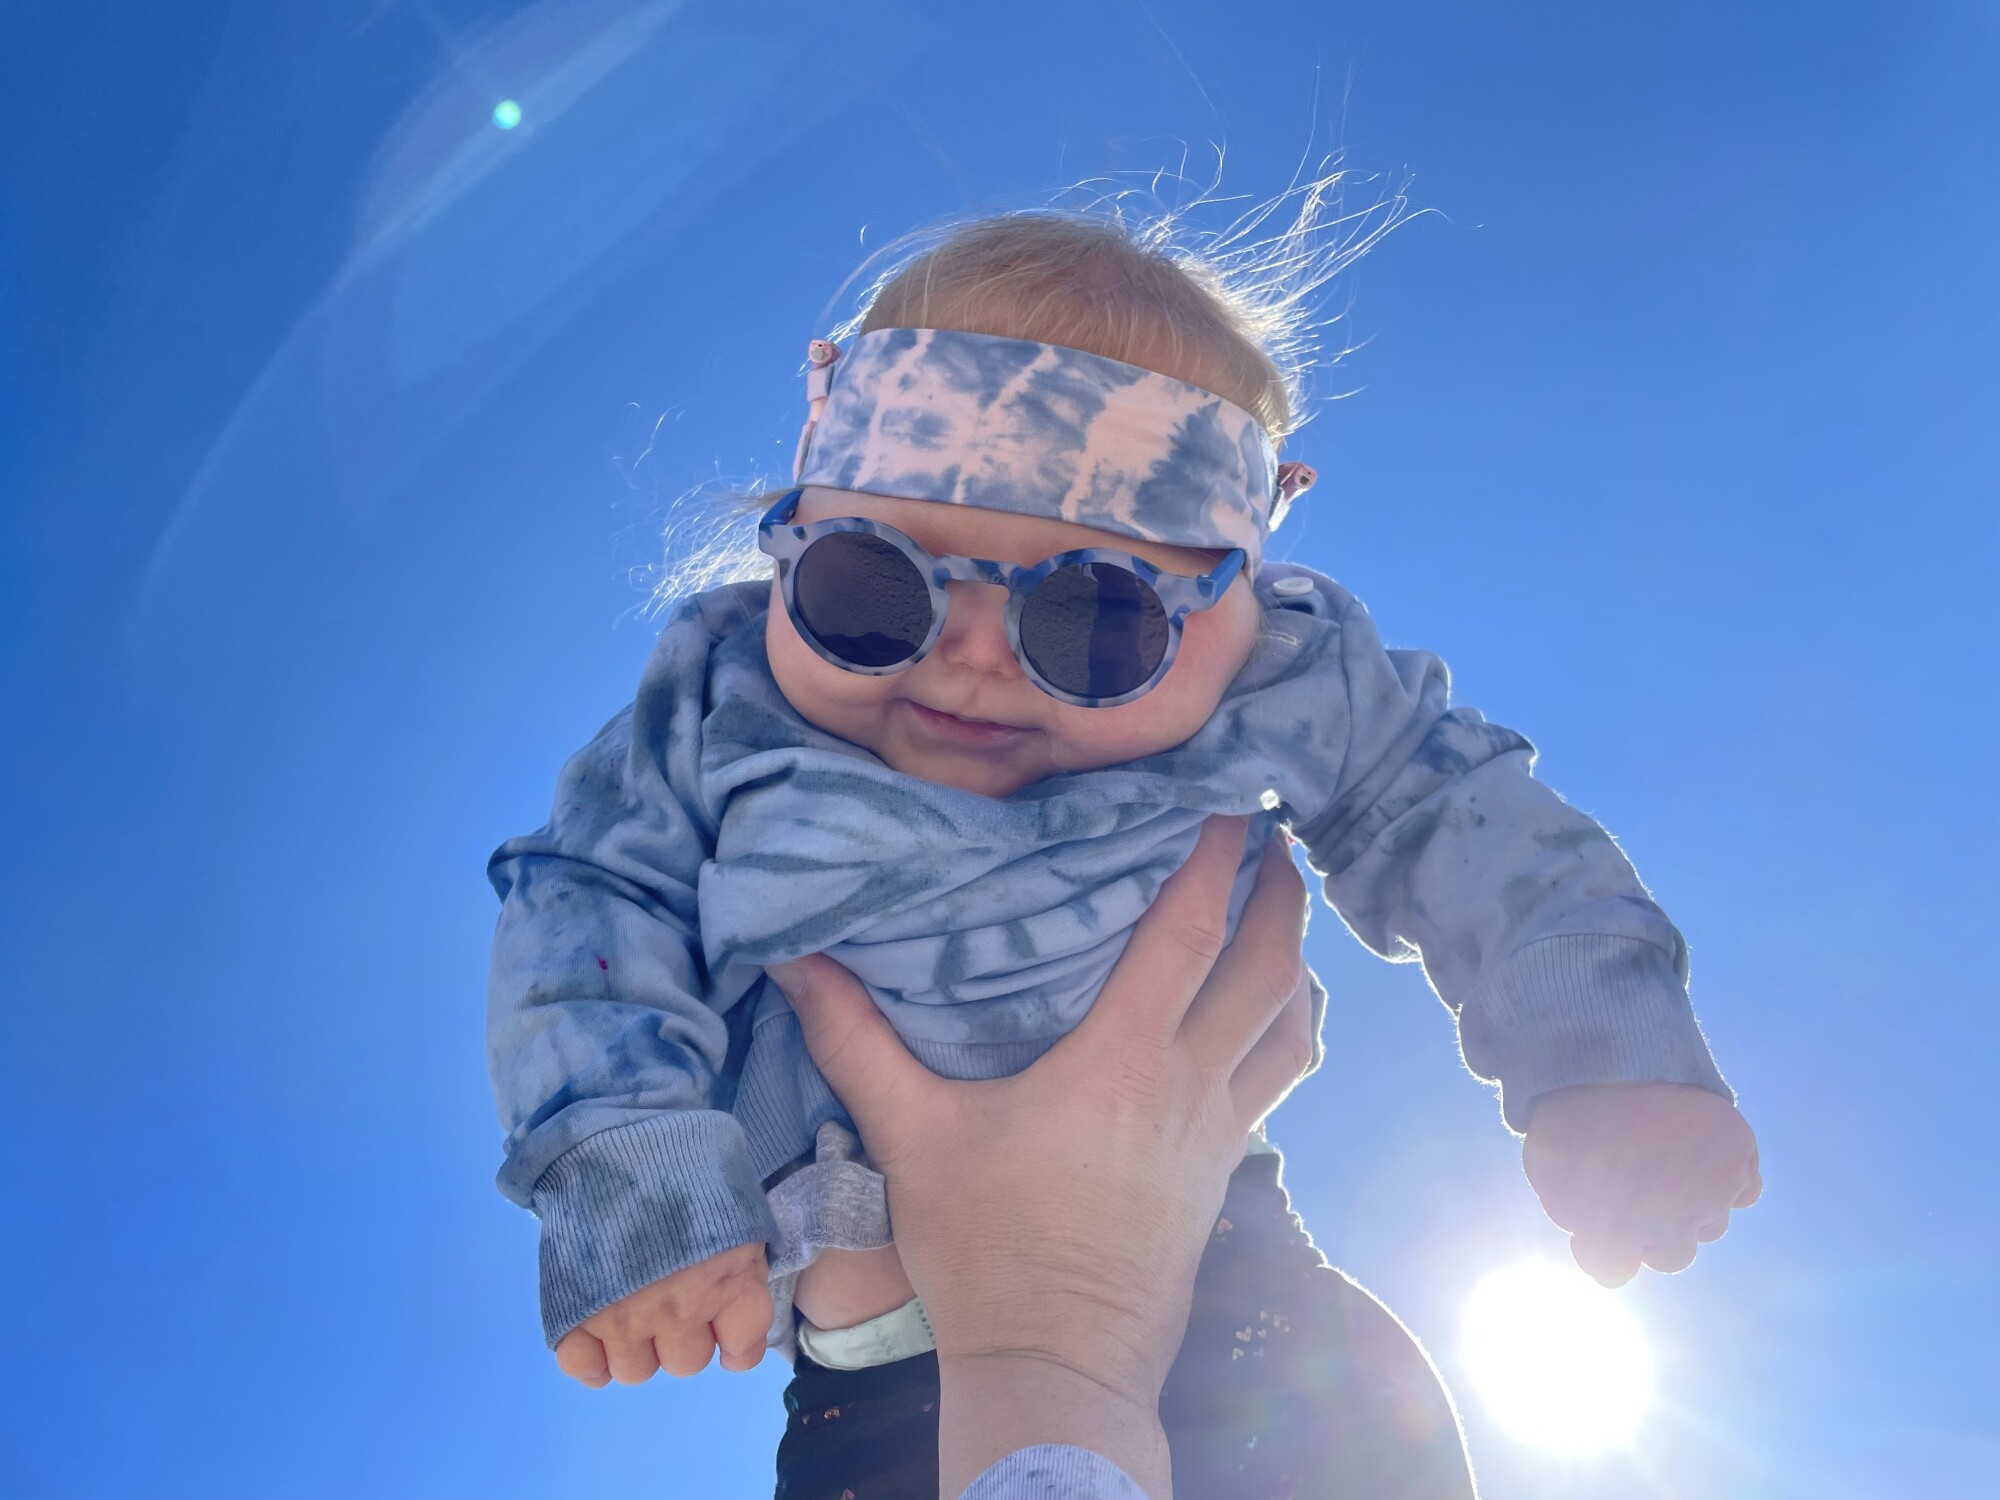 A baby, wearing sunglasses and a headband, being held in the air.